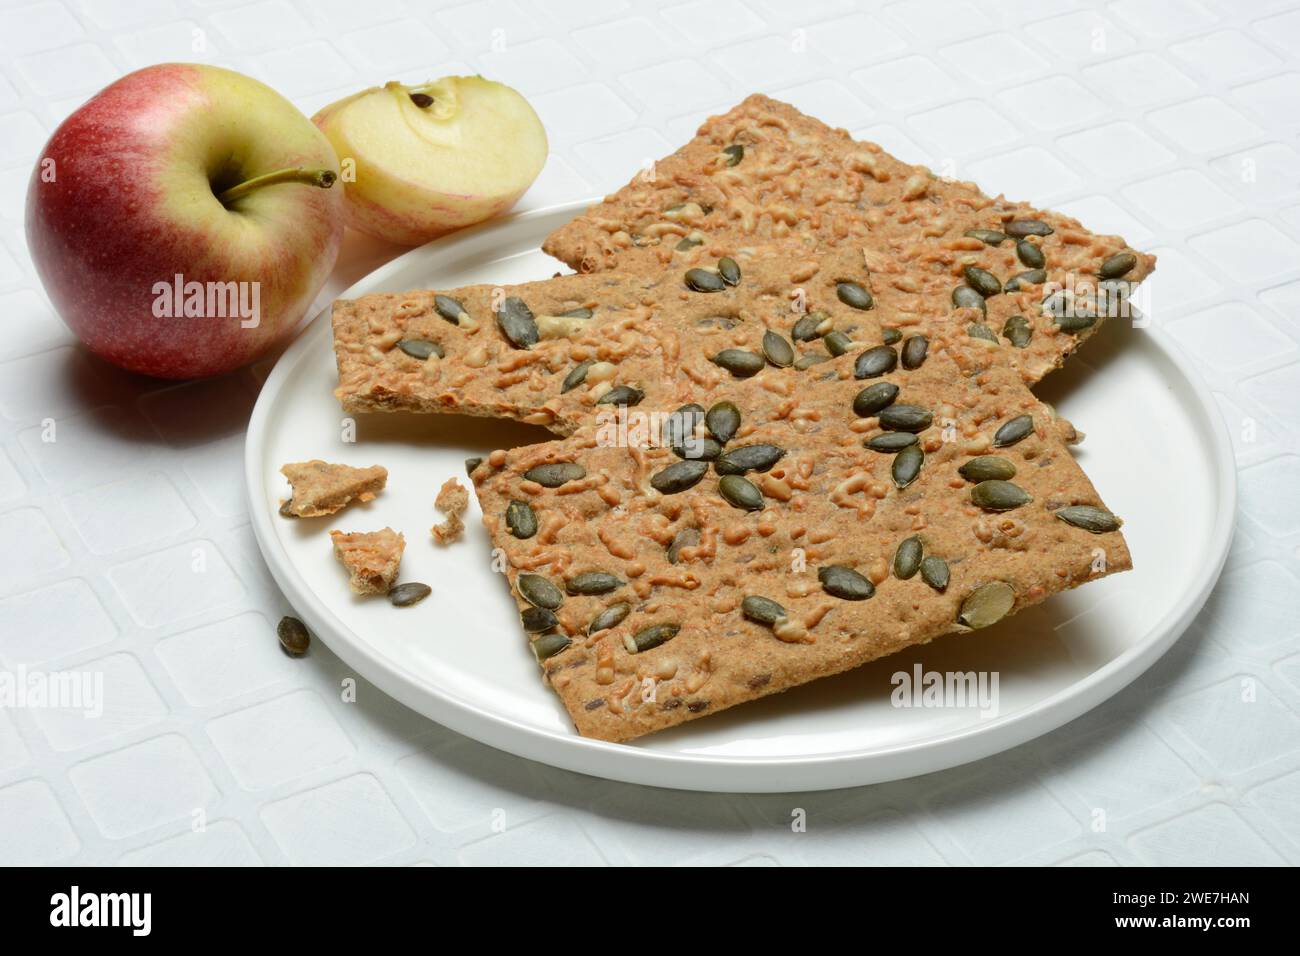 Crispbread with seeds on a plate and apple Stock Photo